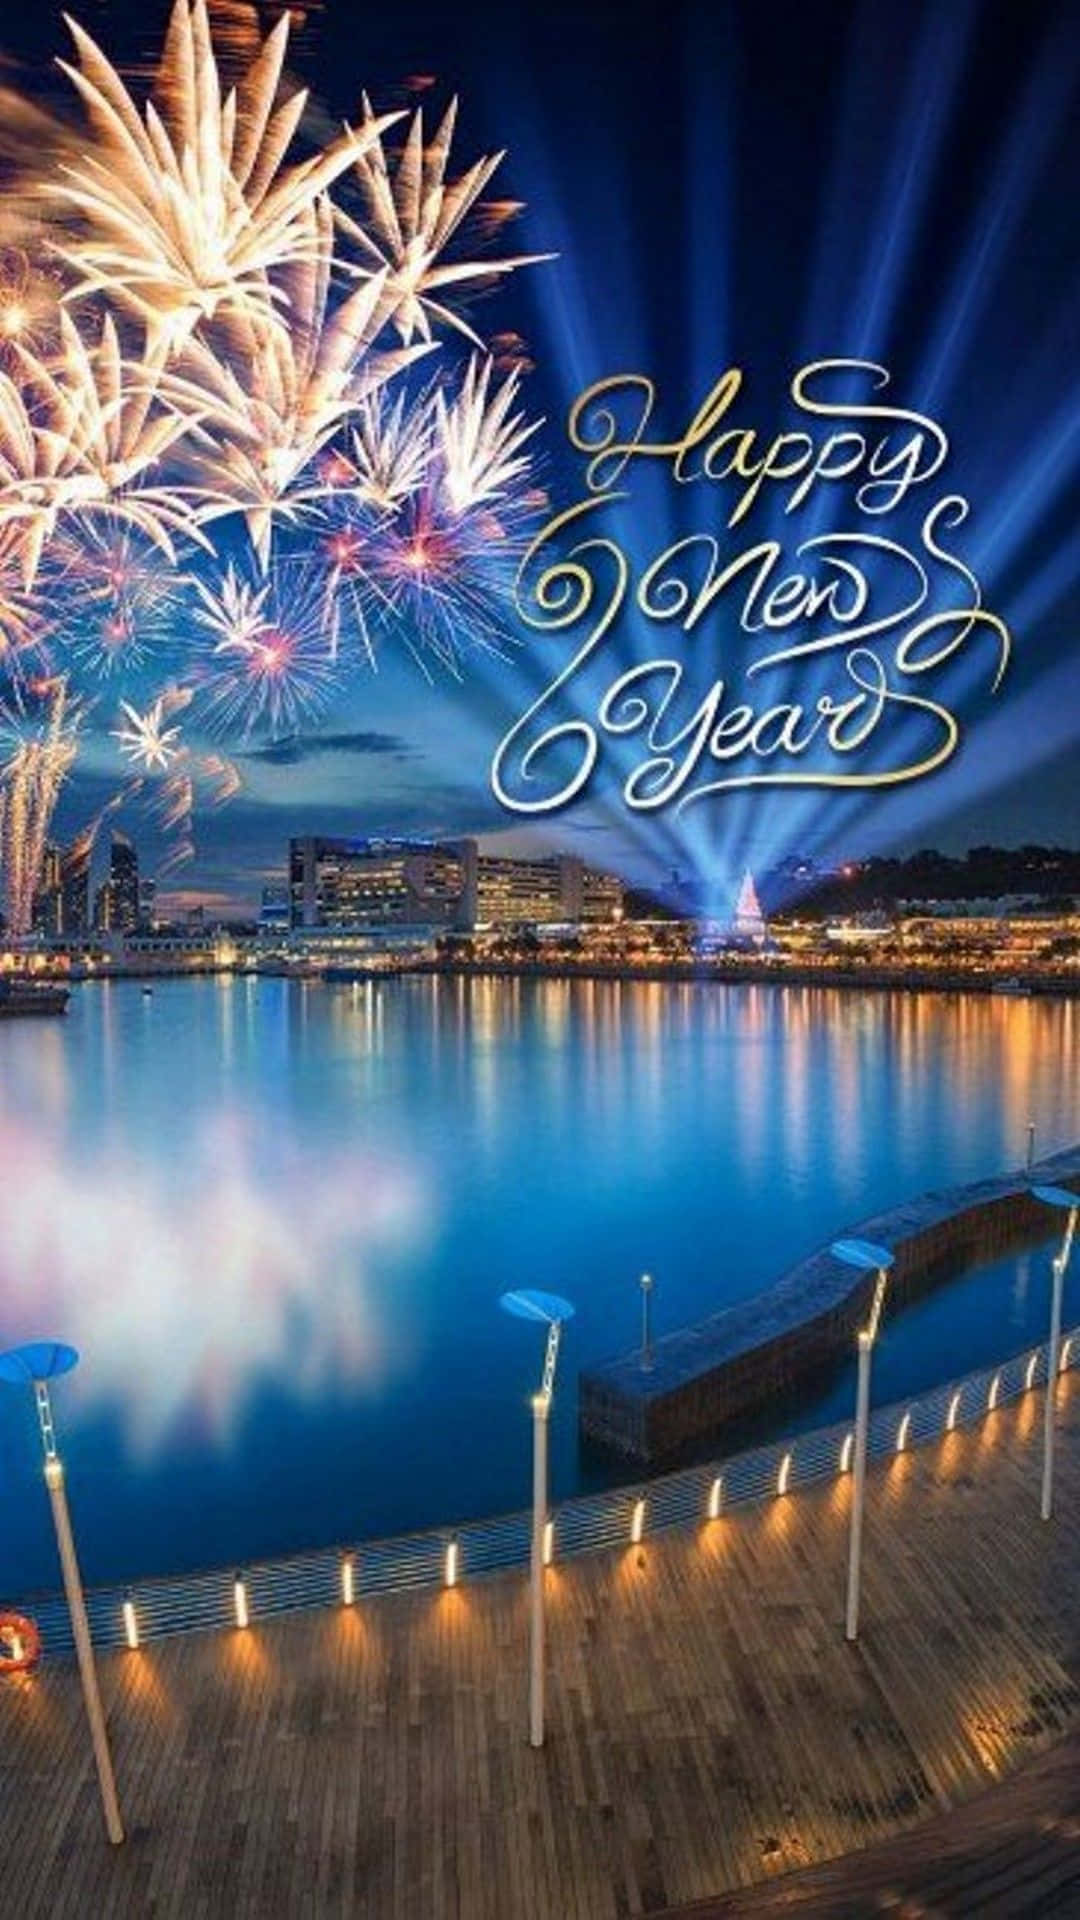 Happy New Year With Fireworks Iphone Wallpaper